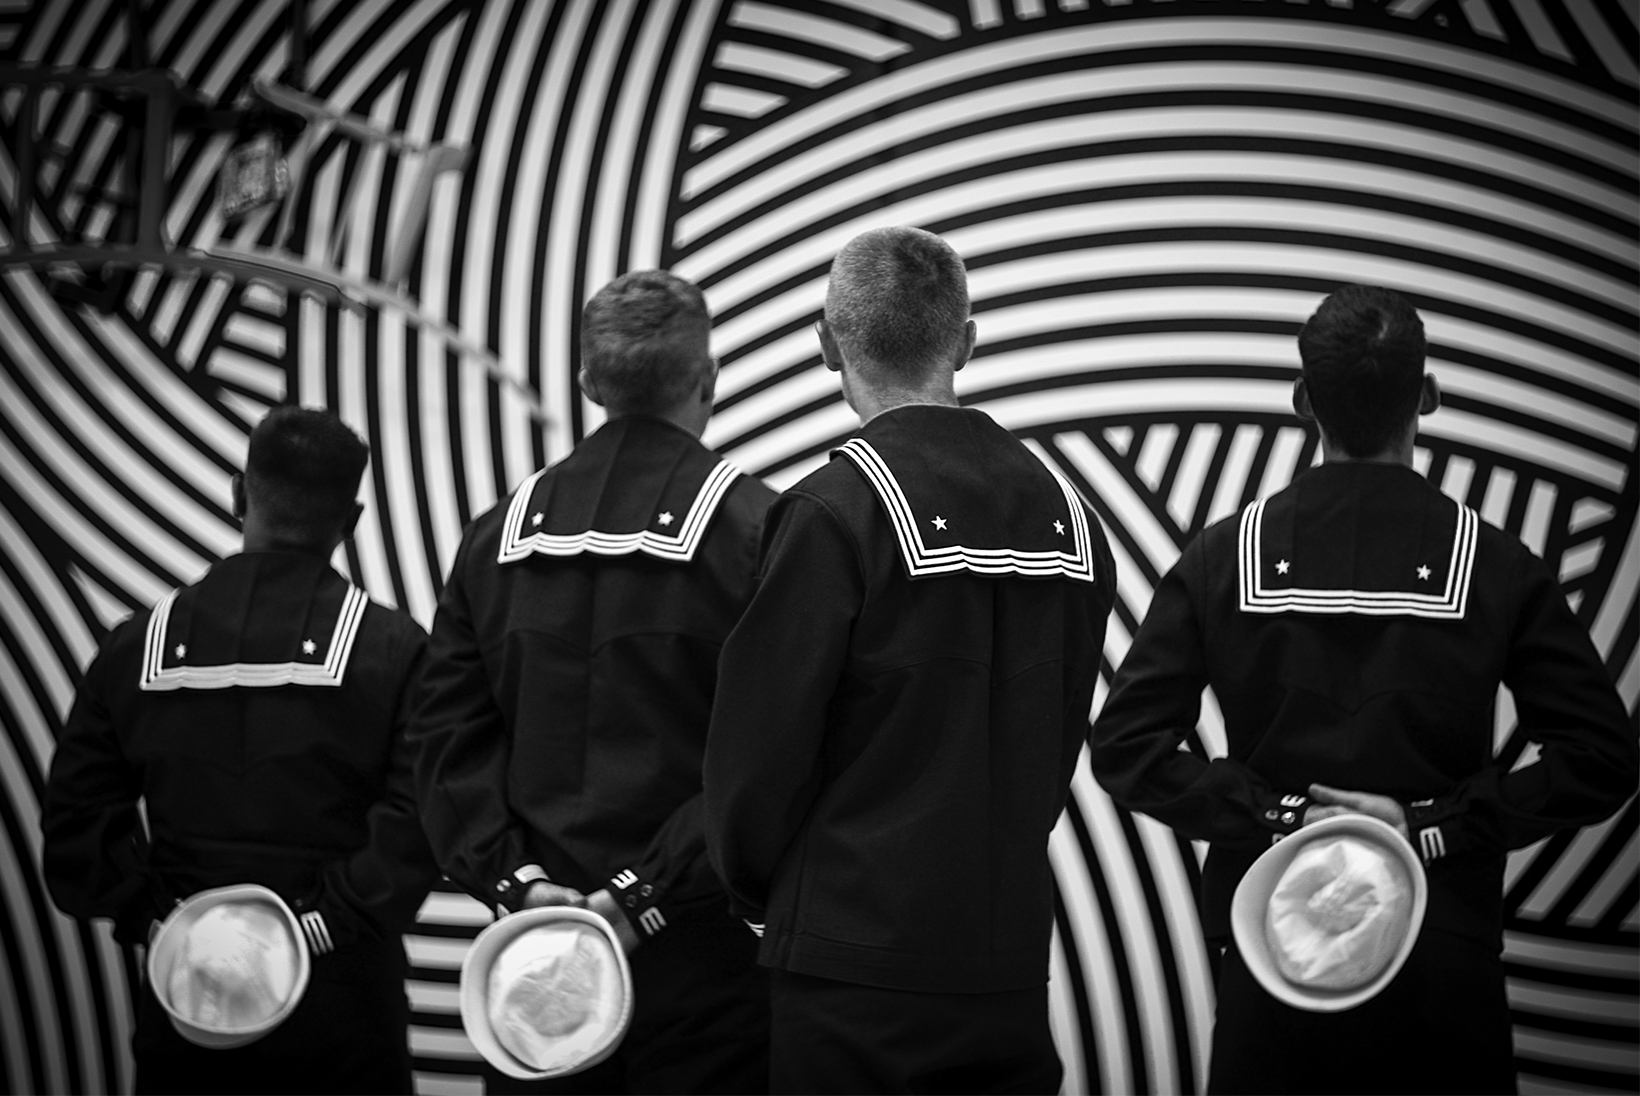 Four sailors in service dress blues seen from behind. Three have their hands behind their backs holding “Dixie cup” hats. They are in front of an art installation with curved, haphazard stripes and three interlocking chairs hanging from the top left.